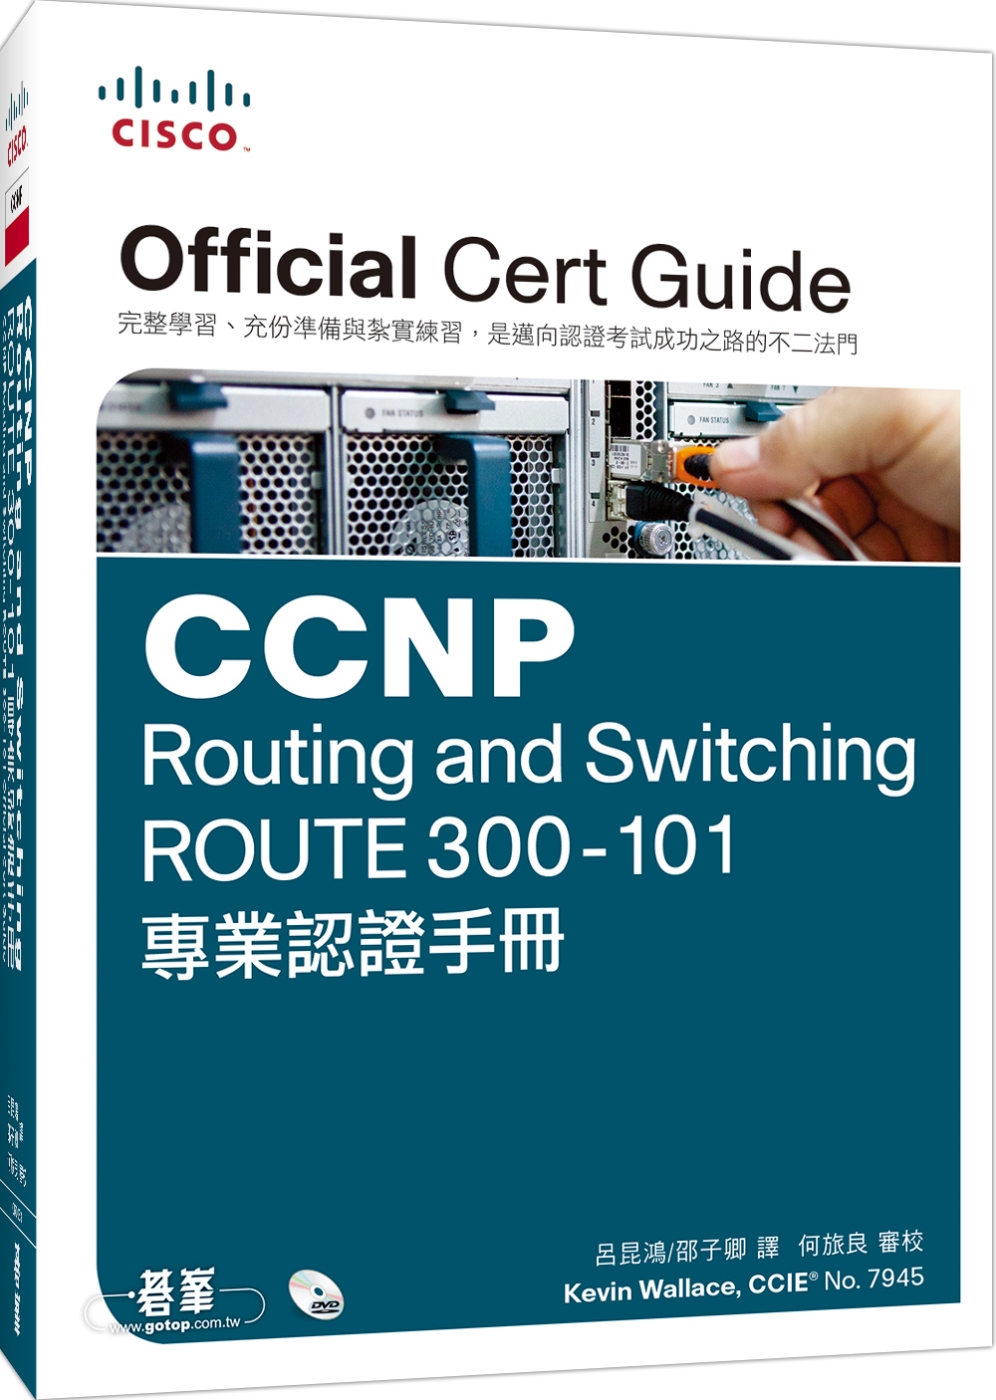 ►GO►最新優惠► 【書籍】CCNP Routing and Switching ROUTE 300-101專業認證手冊(附DVD一片)